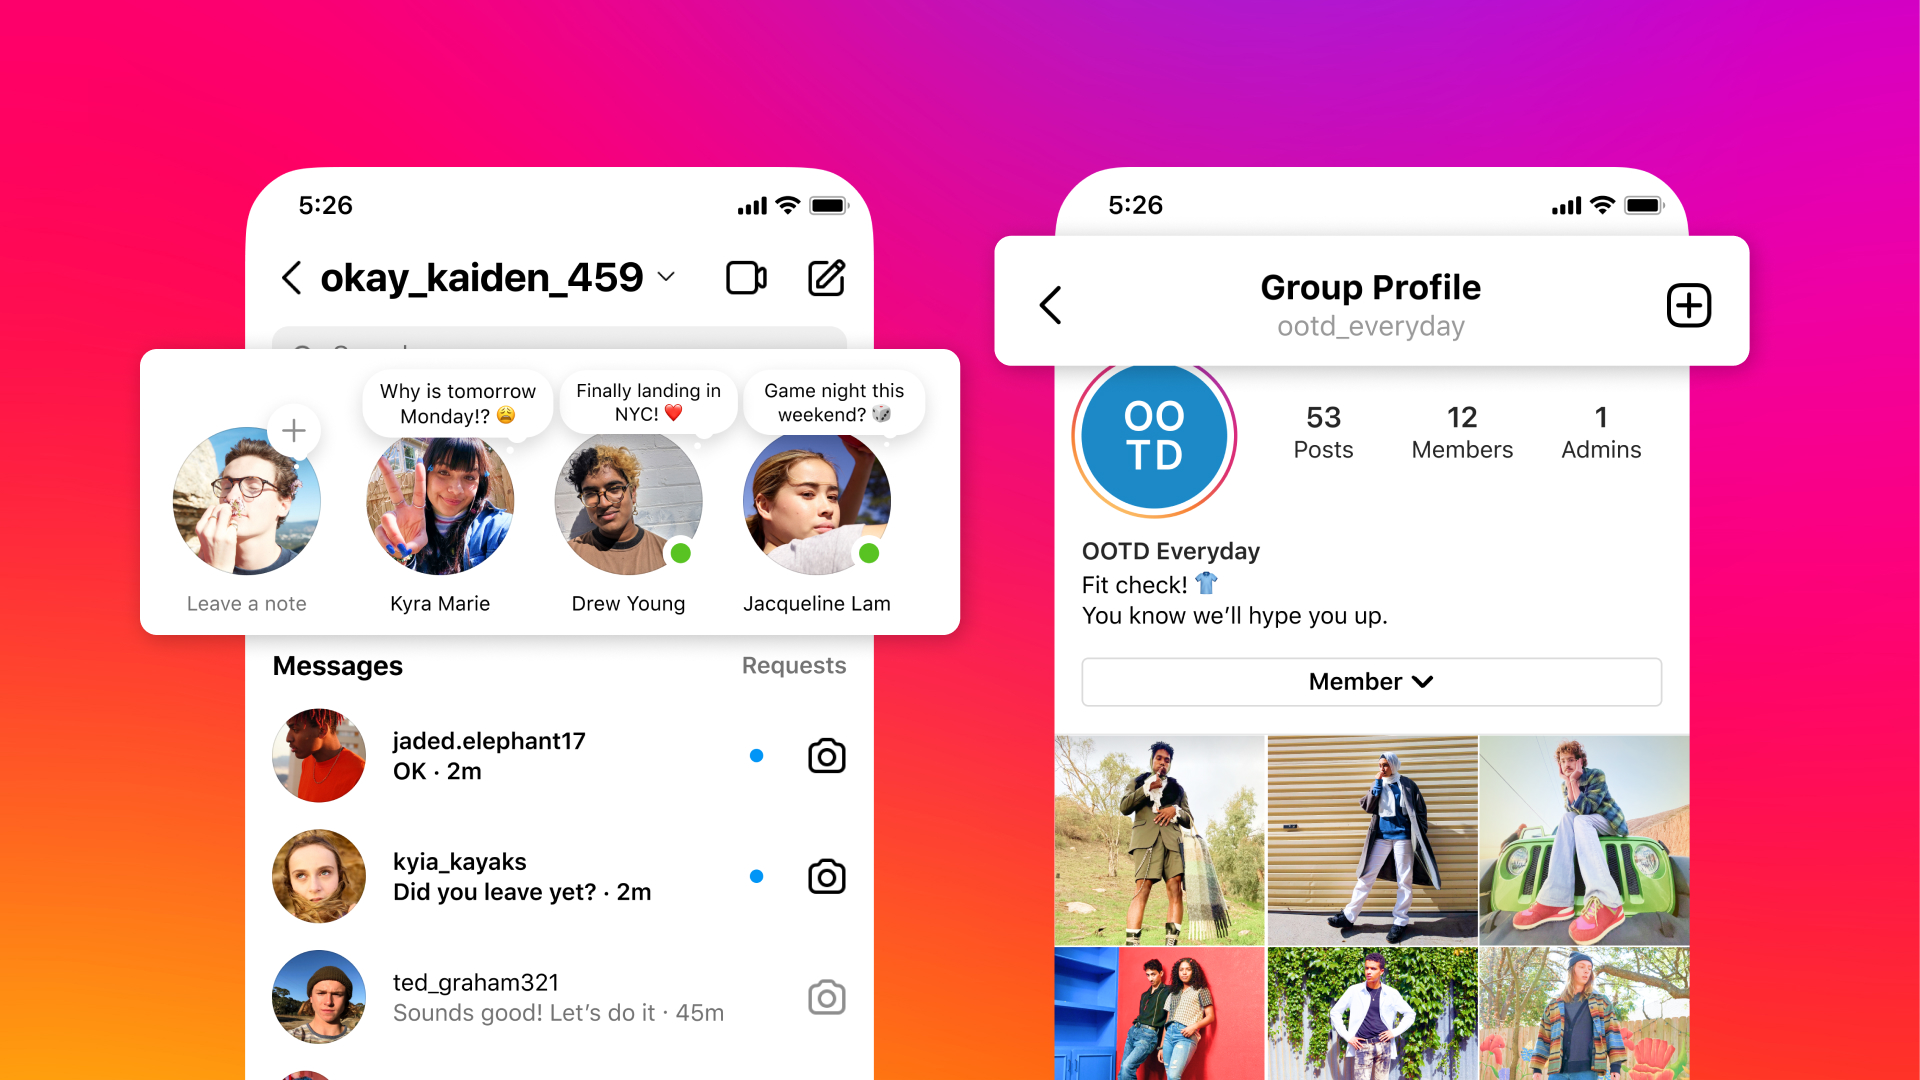 Instagram Is Testing Trials of Forced Ads Which You Won’t Be Able To Swipe and Avoid